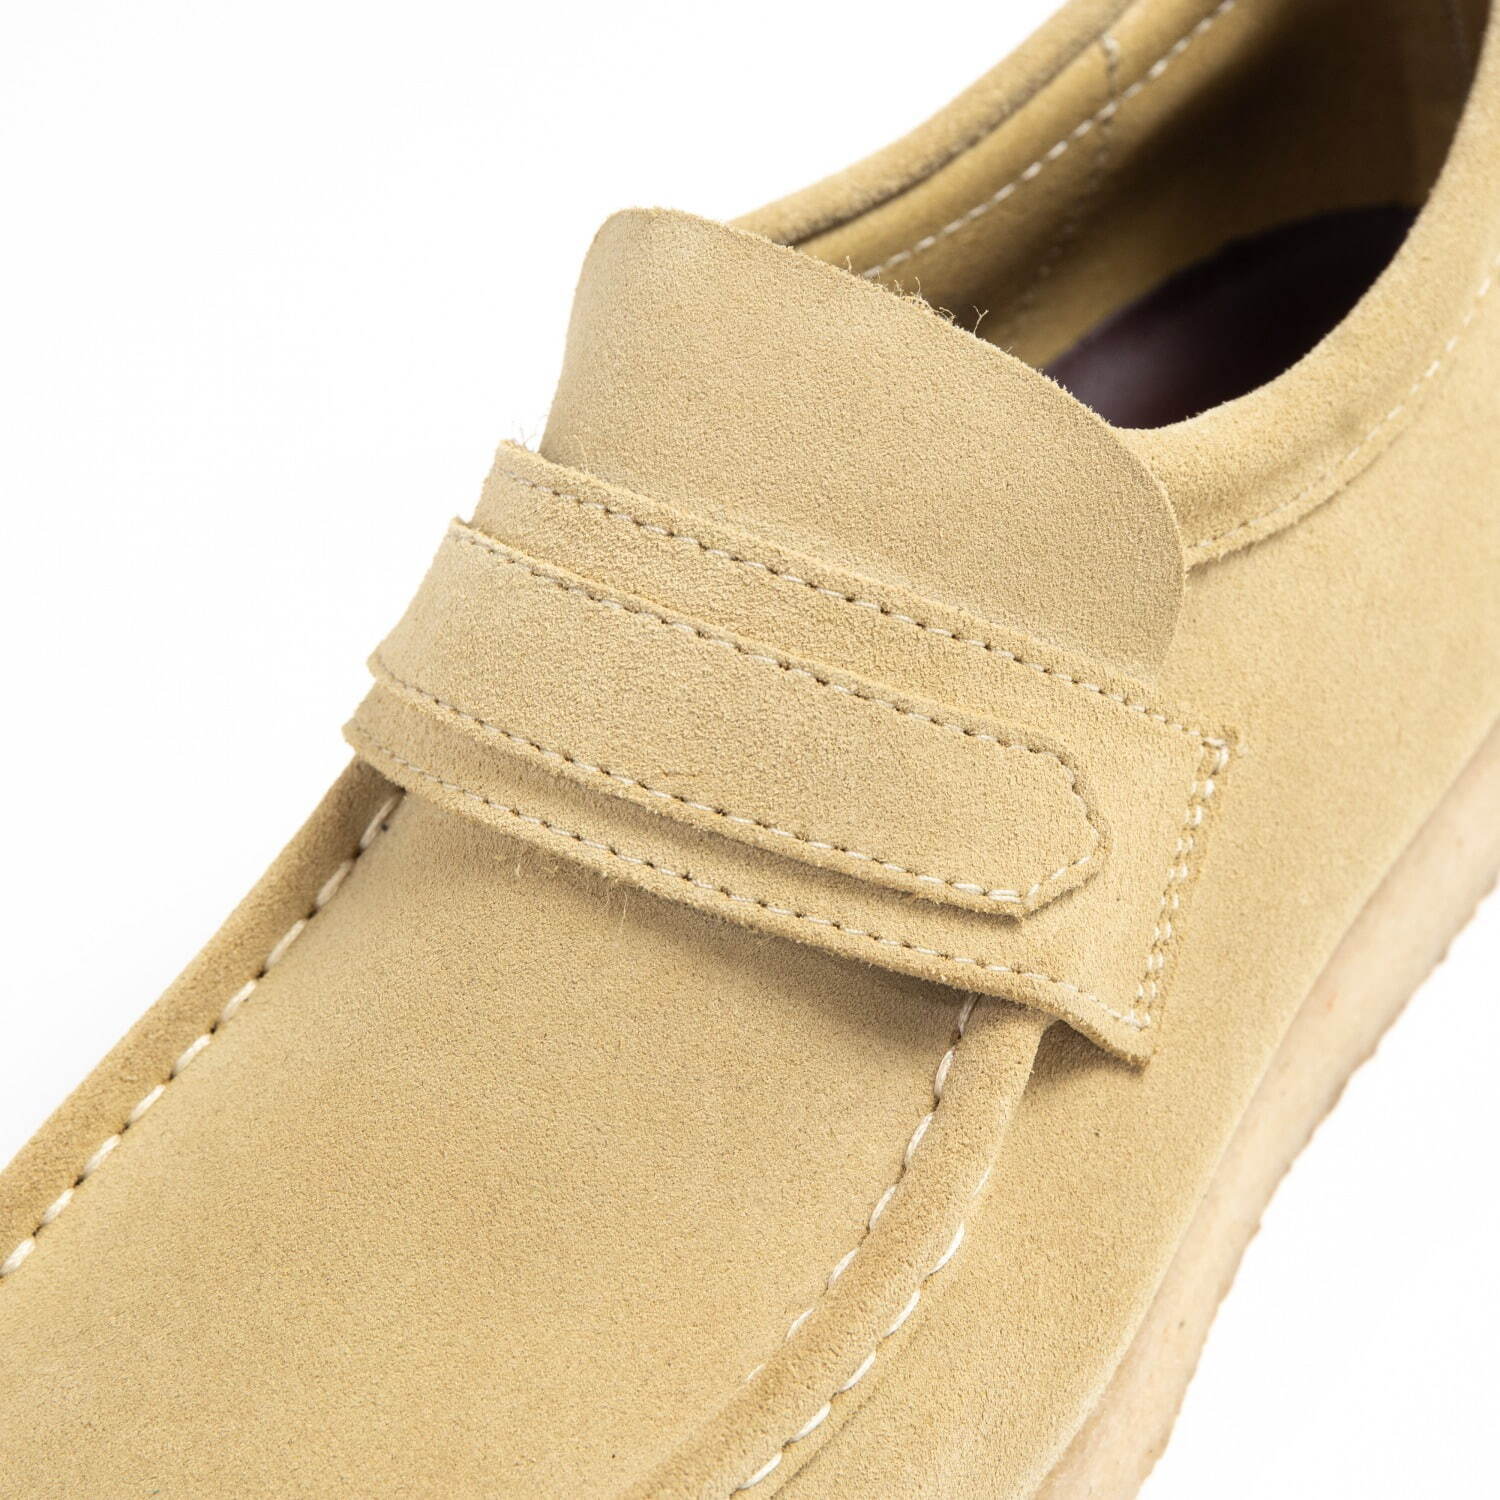 clarks-wallabee-loafer (2)